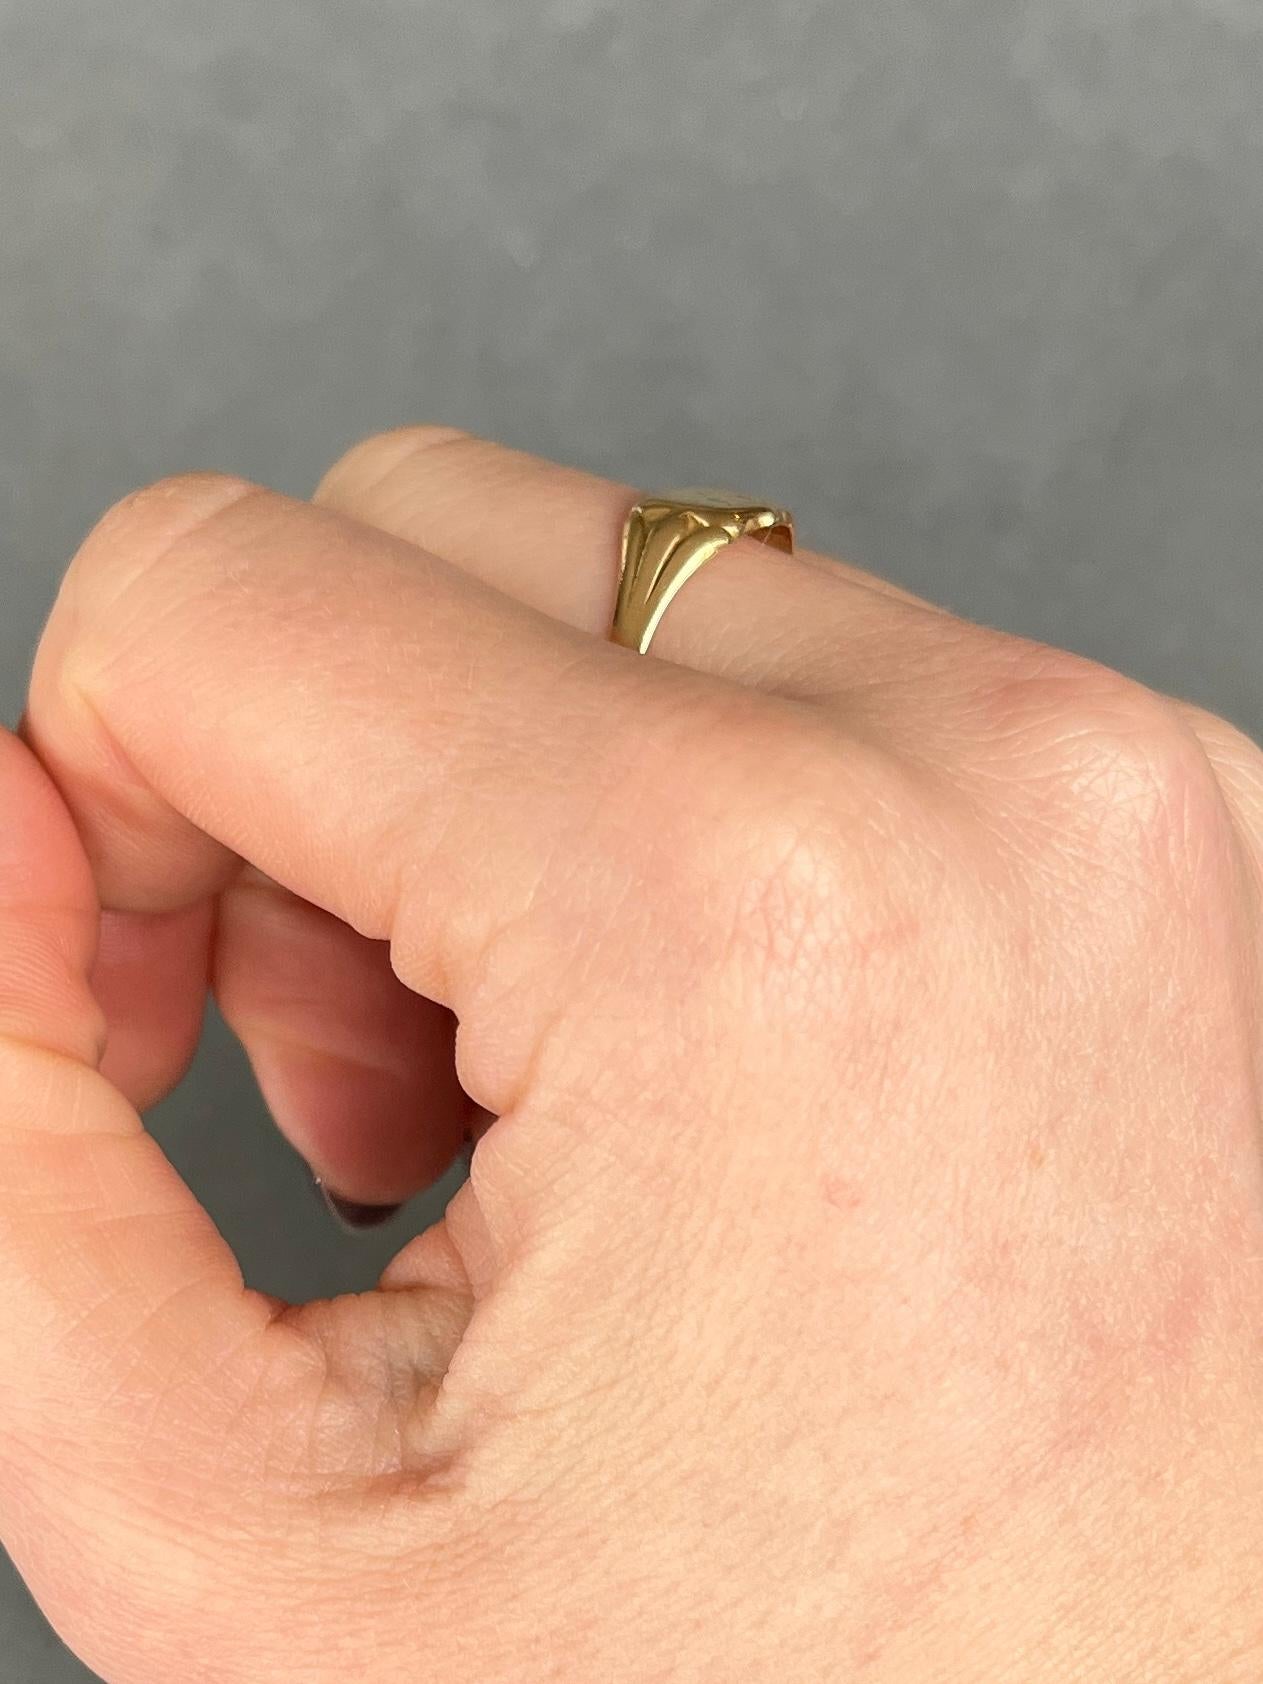 This ring is modelled in glossy 18 carat gold and has the faintest engraving on the front. The letters can't be made out and are very subtle. Fully hallmarked Chester 1906.

RIng Size: N 1/2 or 7
Widest Part: 9mm 

Weight: 2.6g